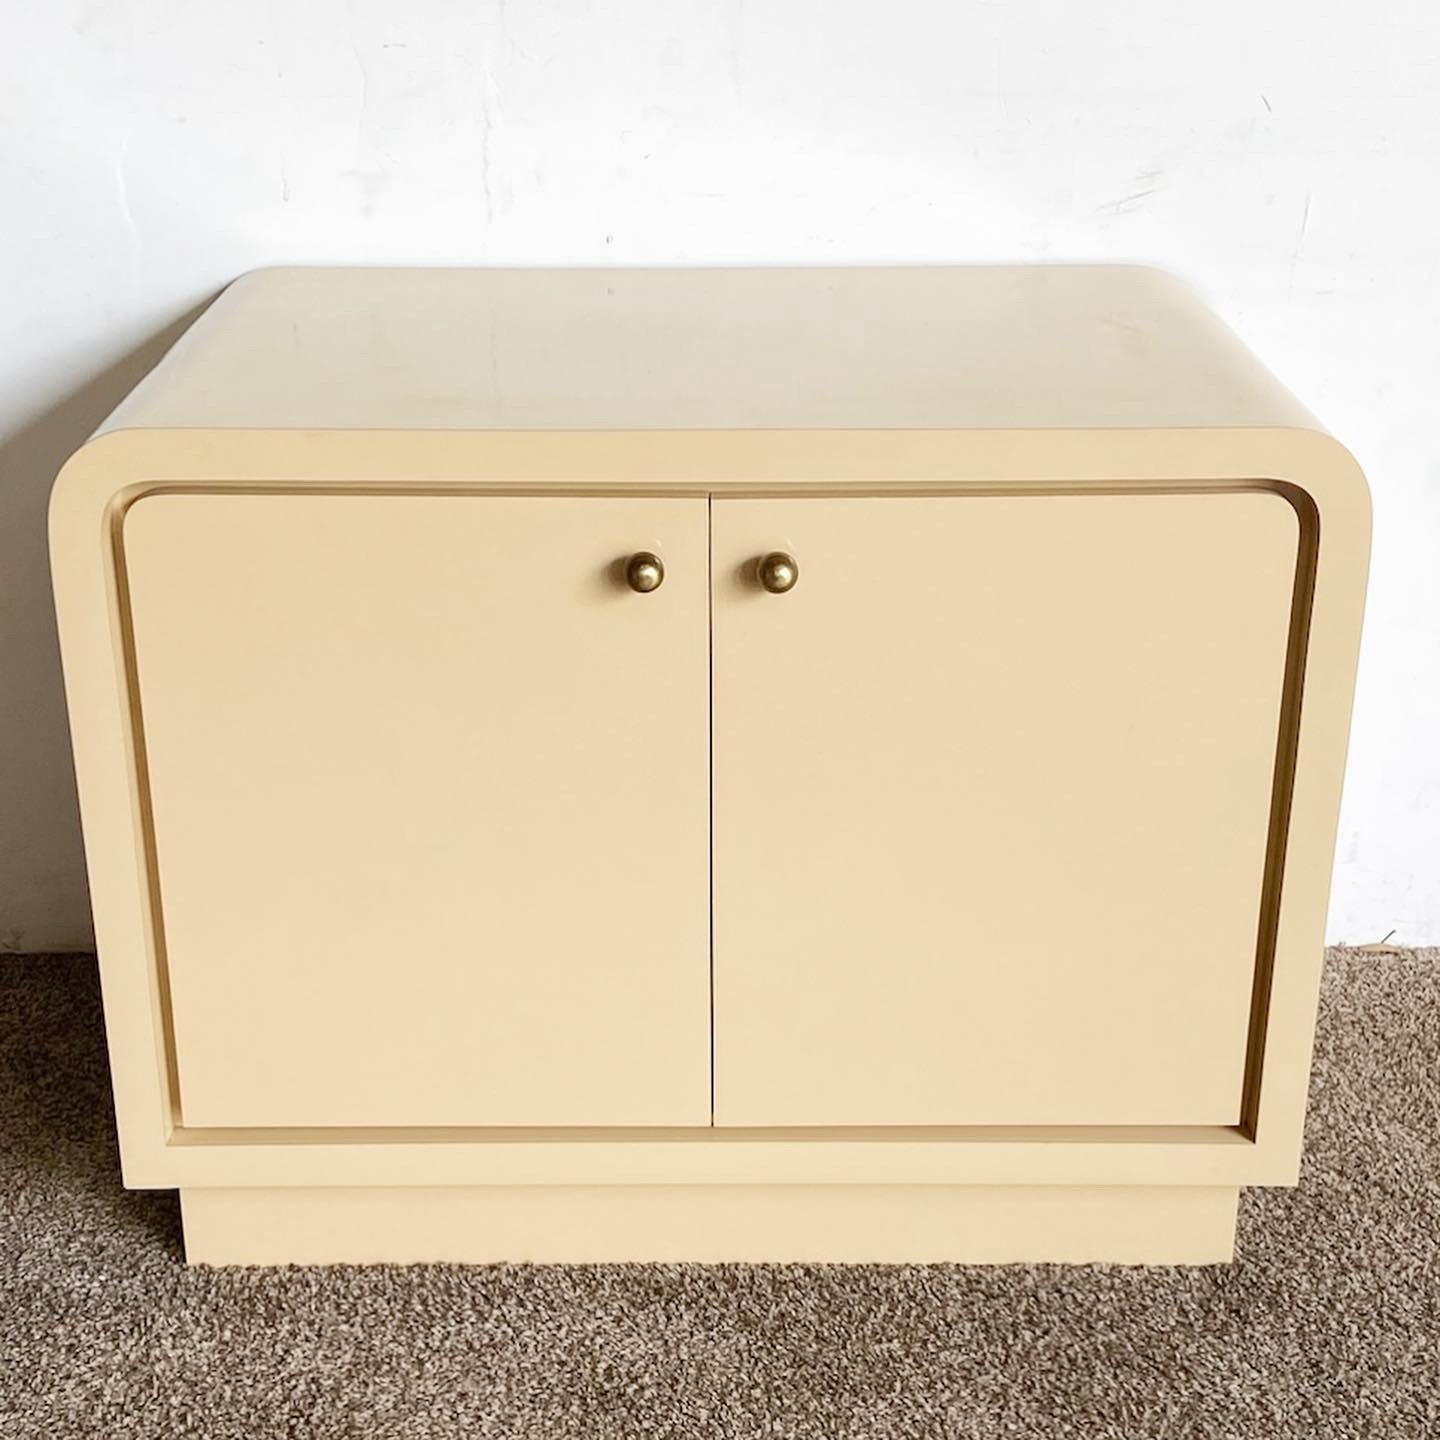 Late 20th Century Postmodern Tan Lacquer Laminate Waterfall Sideboard Cabinet For Sale